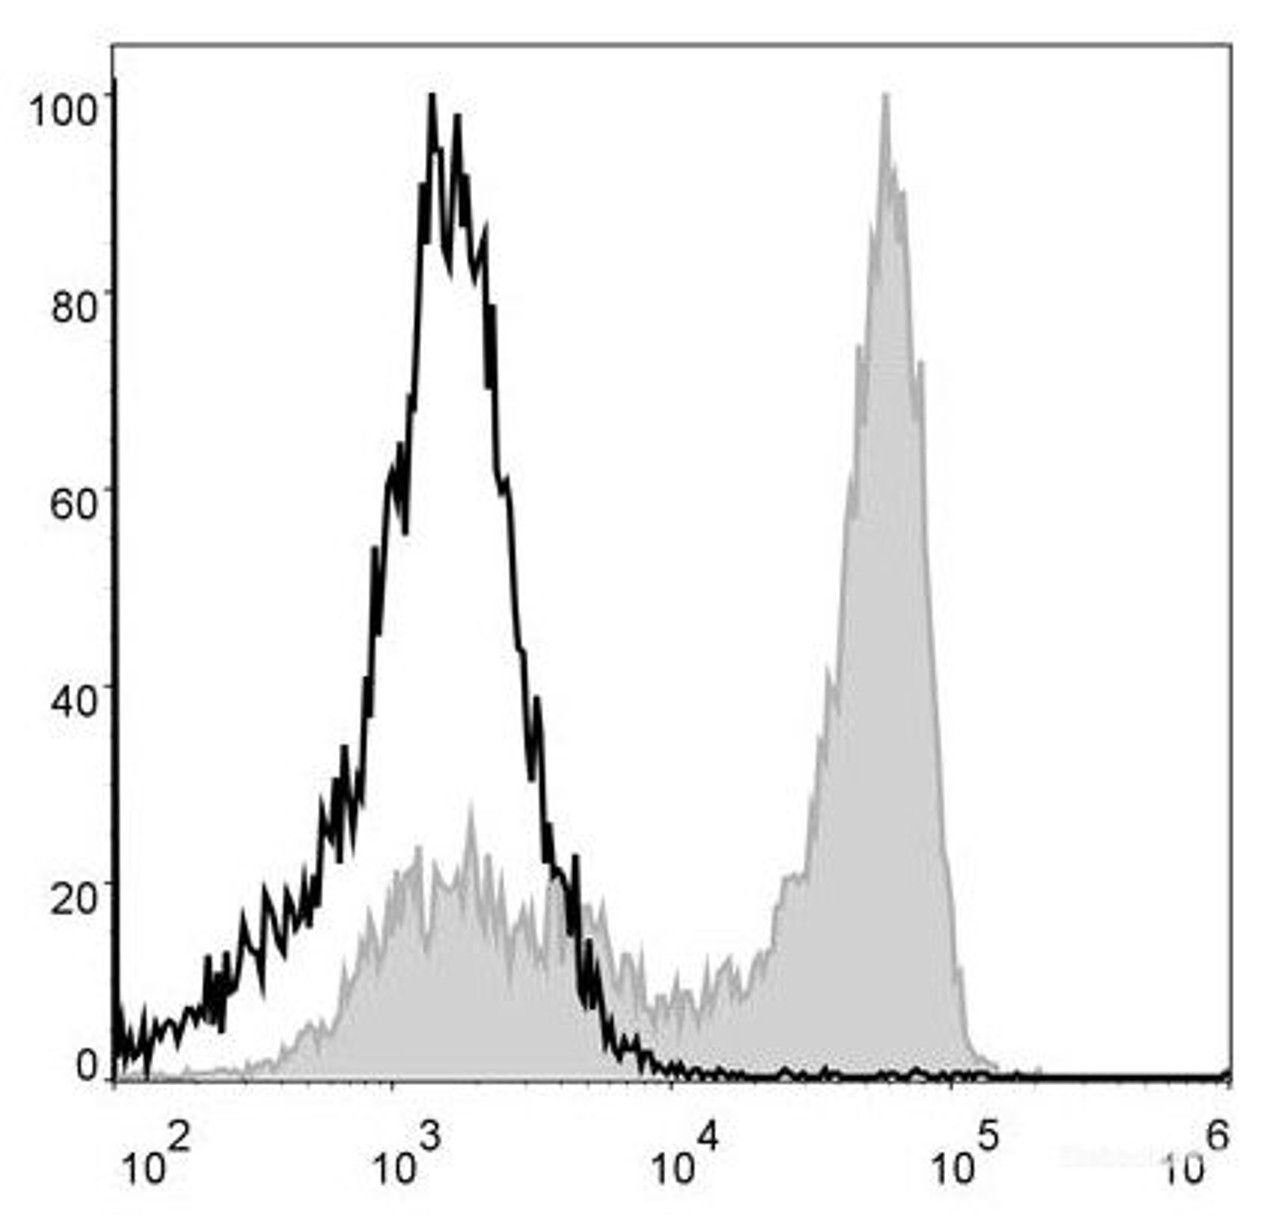 Mouse bone marrow cells are stained with PerCP Anti-Mouse Ly6G Antibody[Used at .5 μg/1<sup>6</sup> cells dilution](filled gray histogram). Unstained bone marrow cells (blank black histogram) are used as control.